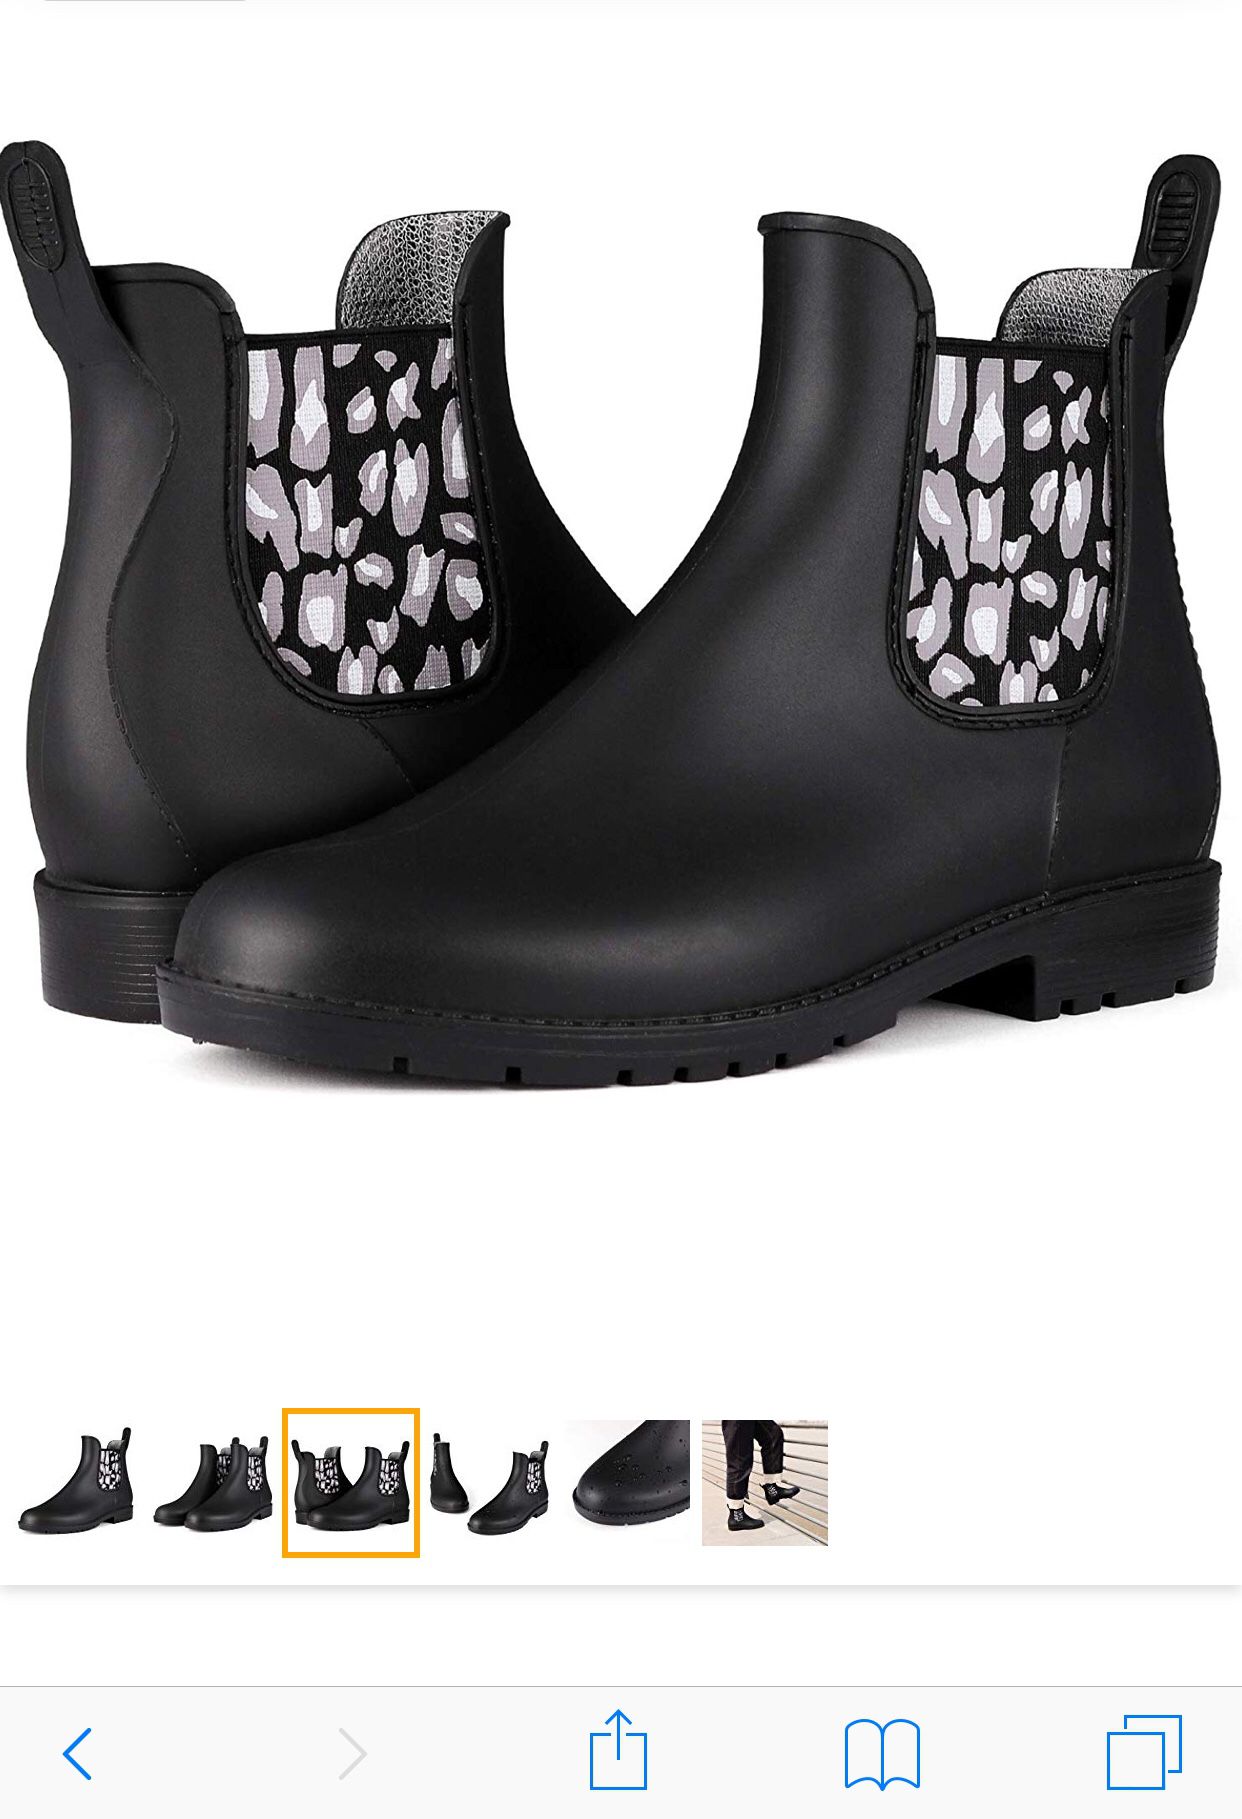 Women Short Rain Boots, Waterproof Chelsea Ankle Fashion Boots with Elastic Prints size 8